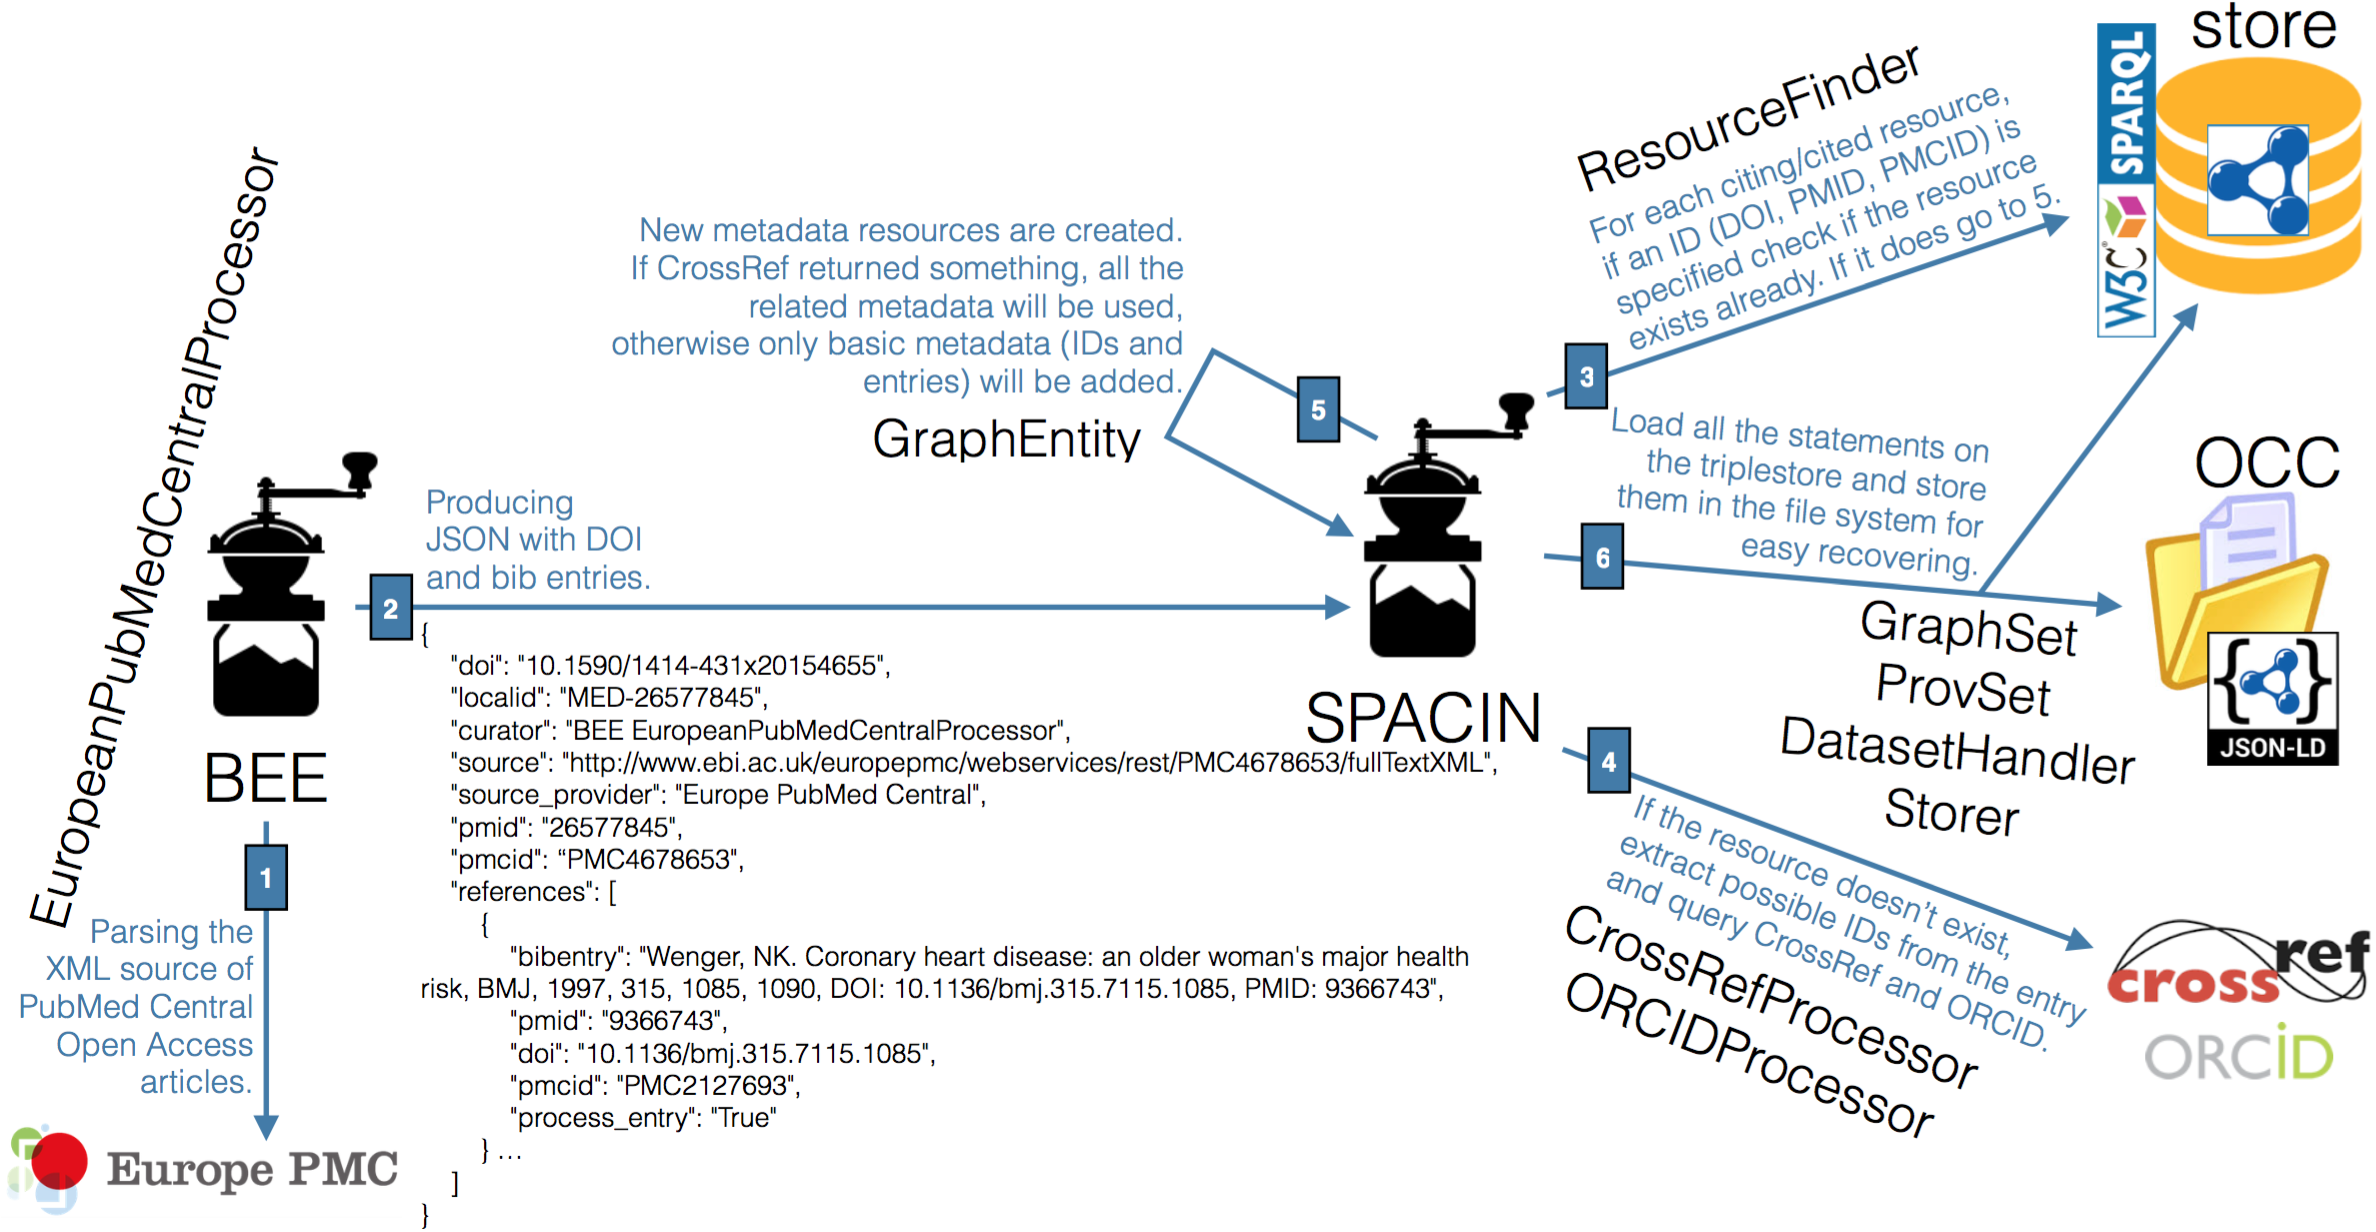 The steps involving BEE and SPACIN, and their related Python classes, in the production of the OpenCitations Corpus.